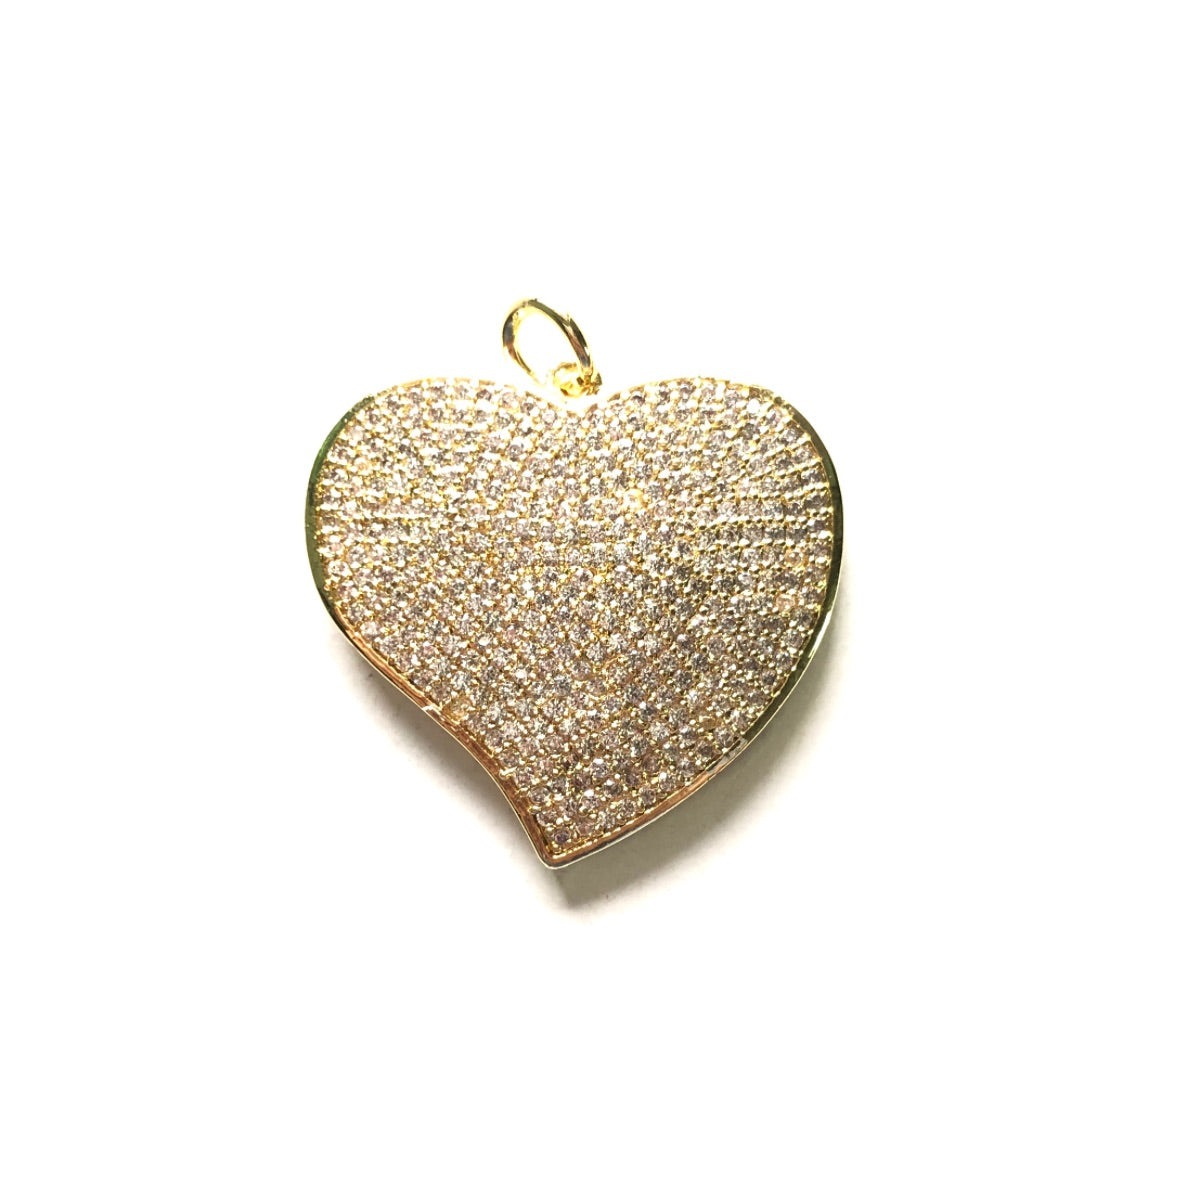 5pcs/lot 28.5*27mm Large Size CZ Paved Heart Charms Gold CZ Paved Charms Hearts Large Sizes New Charms Arrivals Charms Beads Beyond